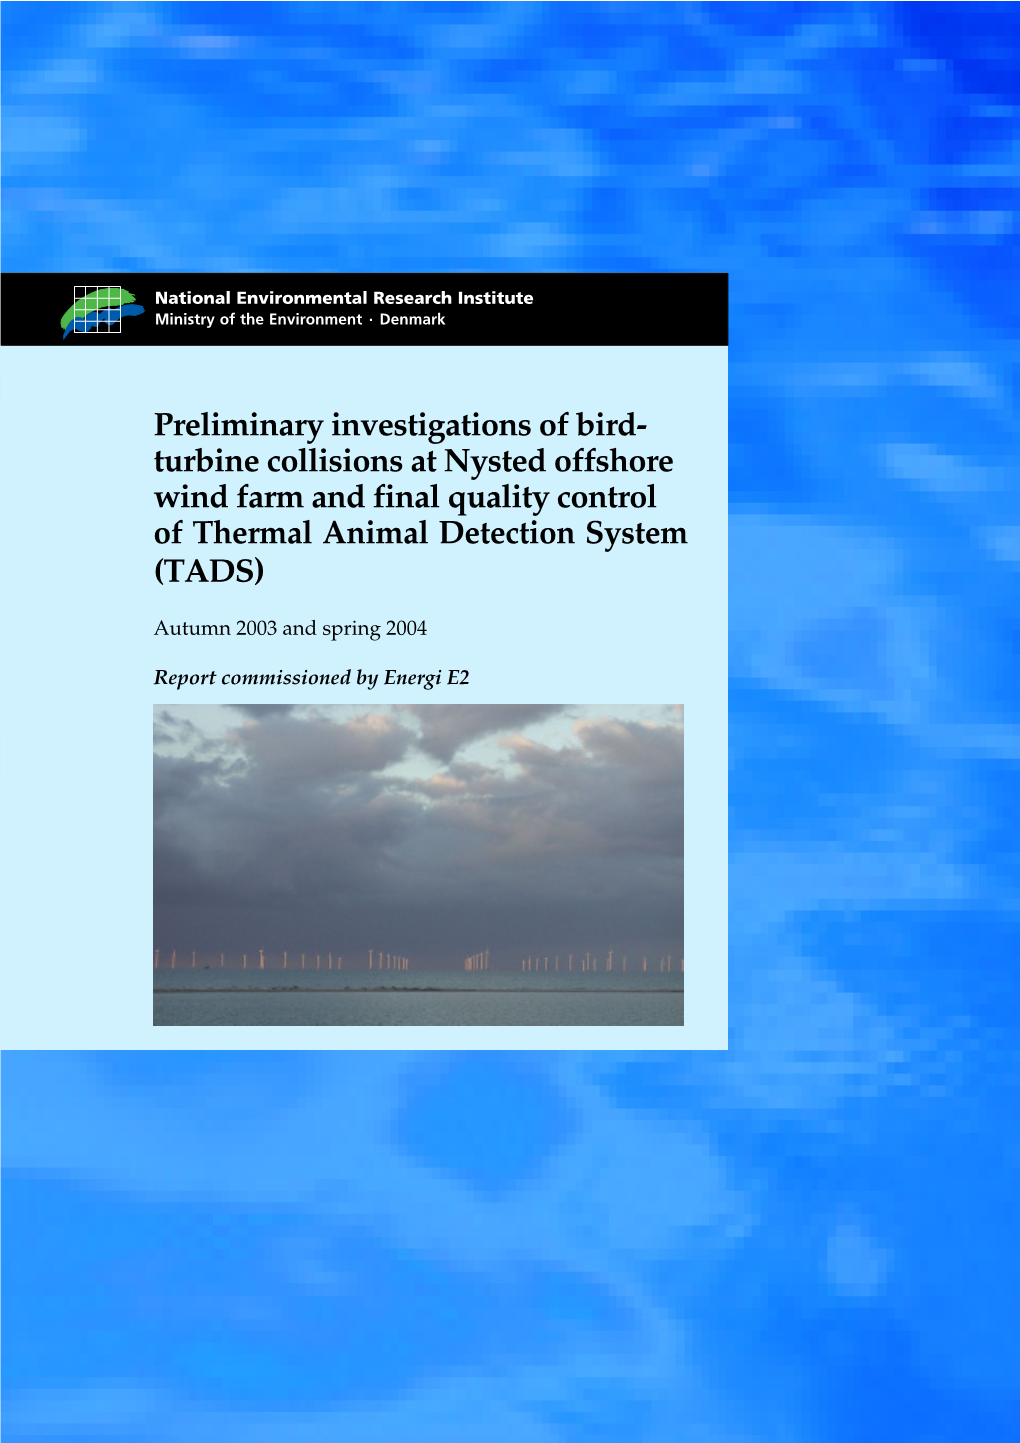 Turbine Collisions at Nysted Offshore Wind Farm and Final Quality Control of Thermal Animal Detection System (TADS)